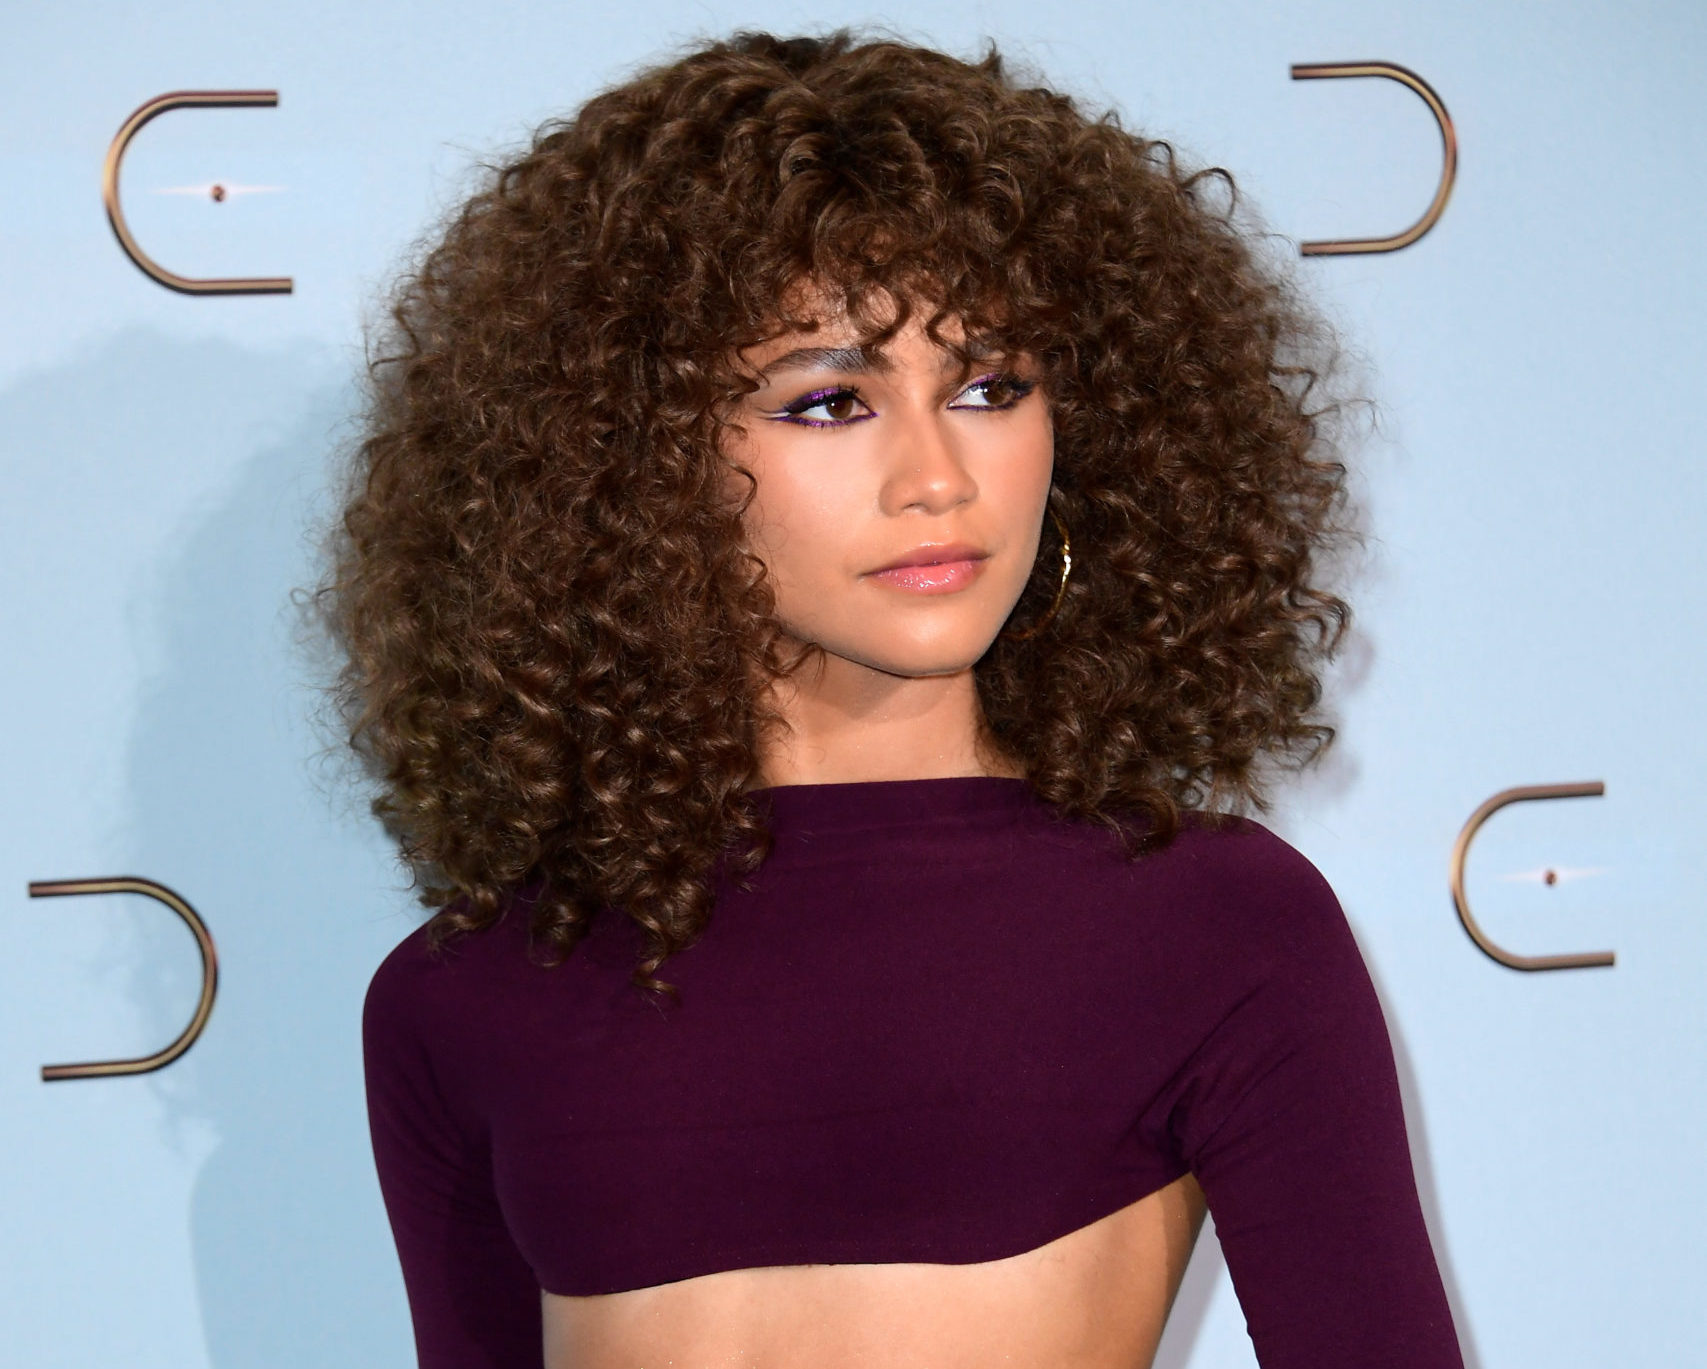 Zendaya on the red carpet, wants to be a director.